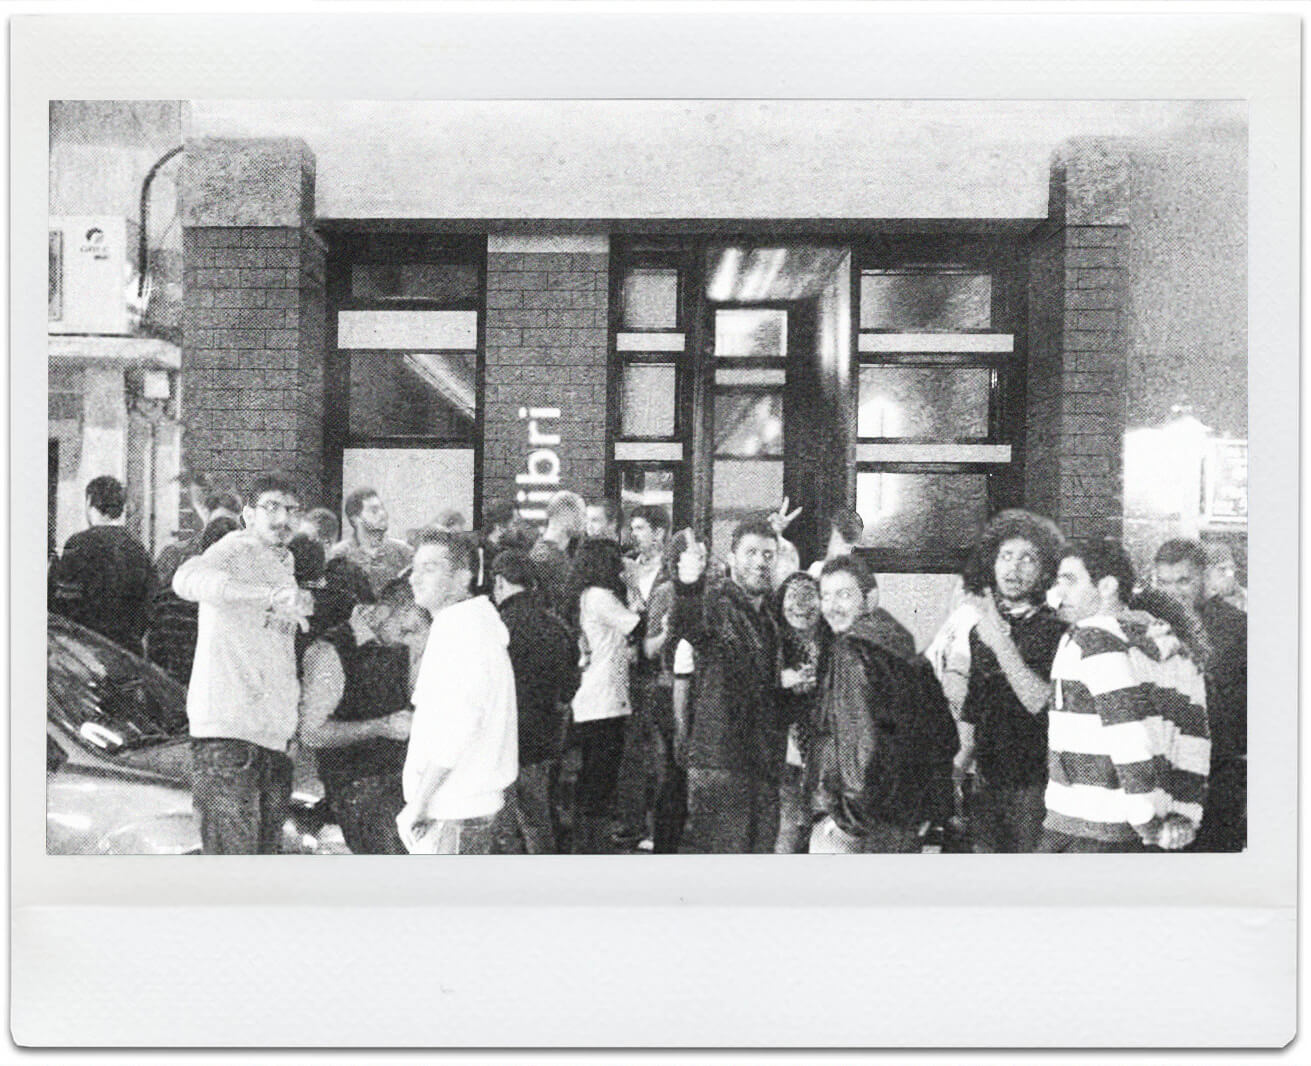 The Storefront Rendered and presented as a polaroid photo